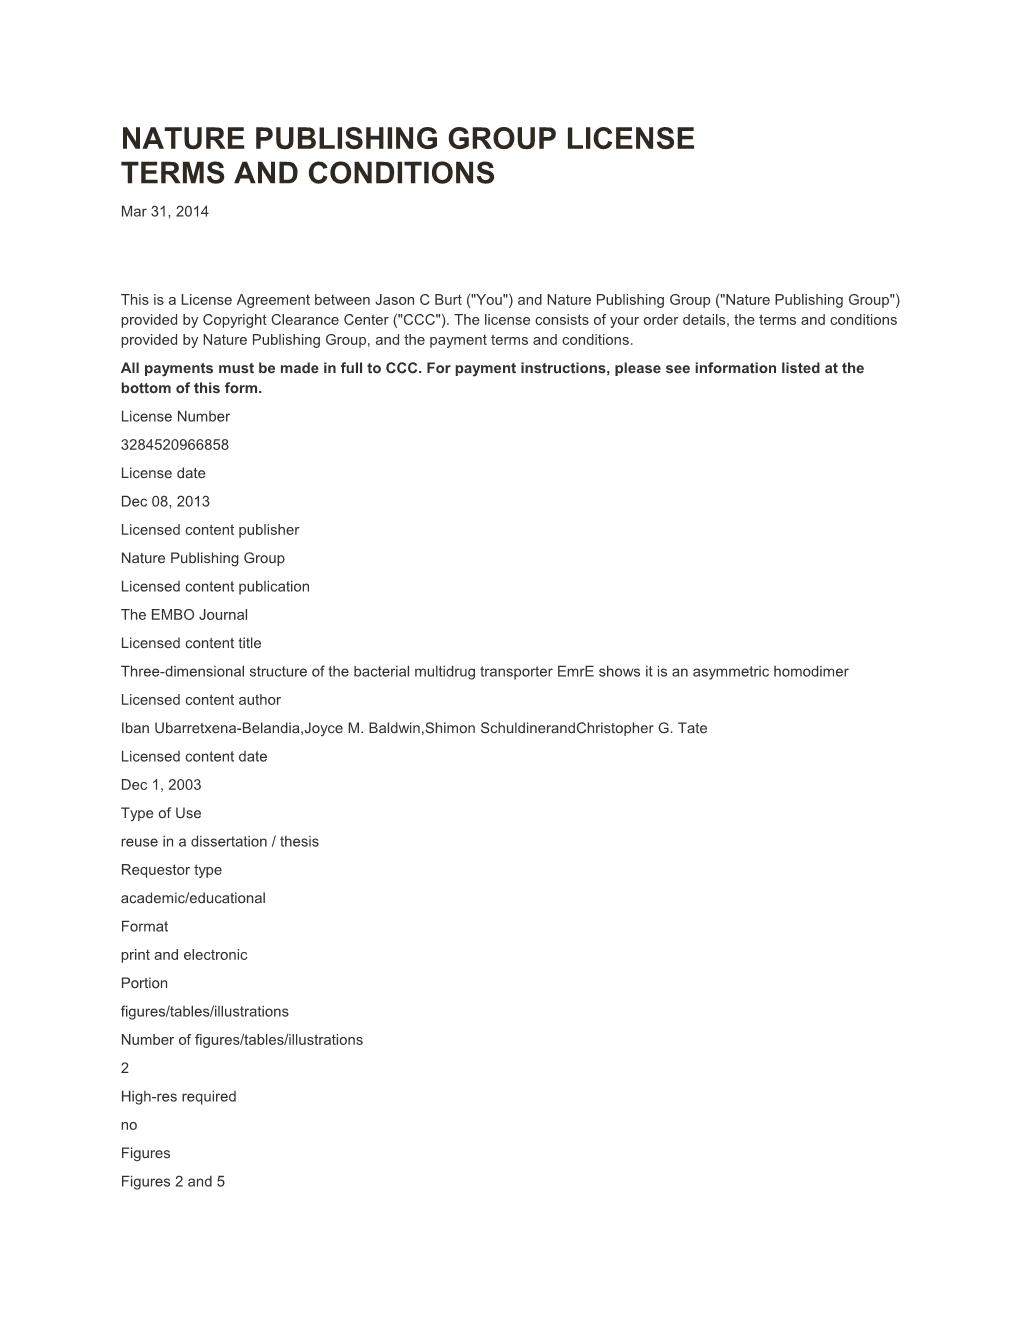 Nature Publishing Group License Terms and Conditions